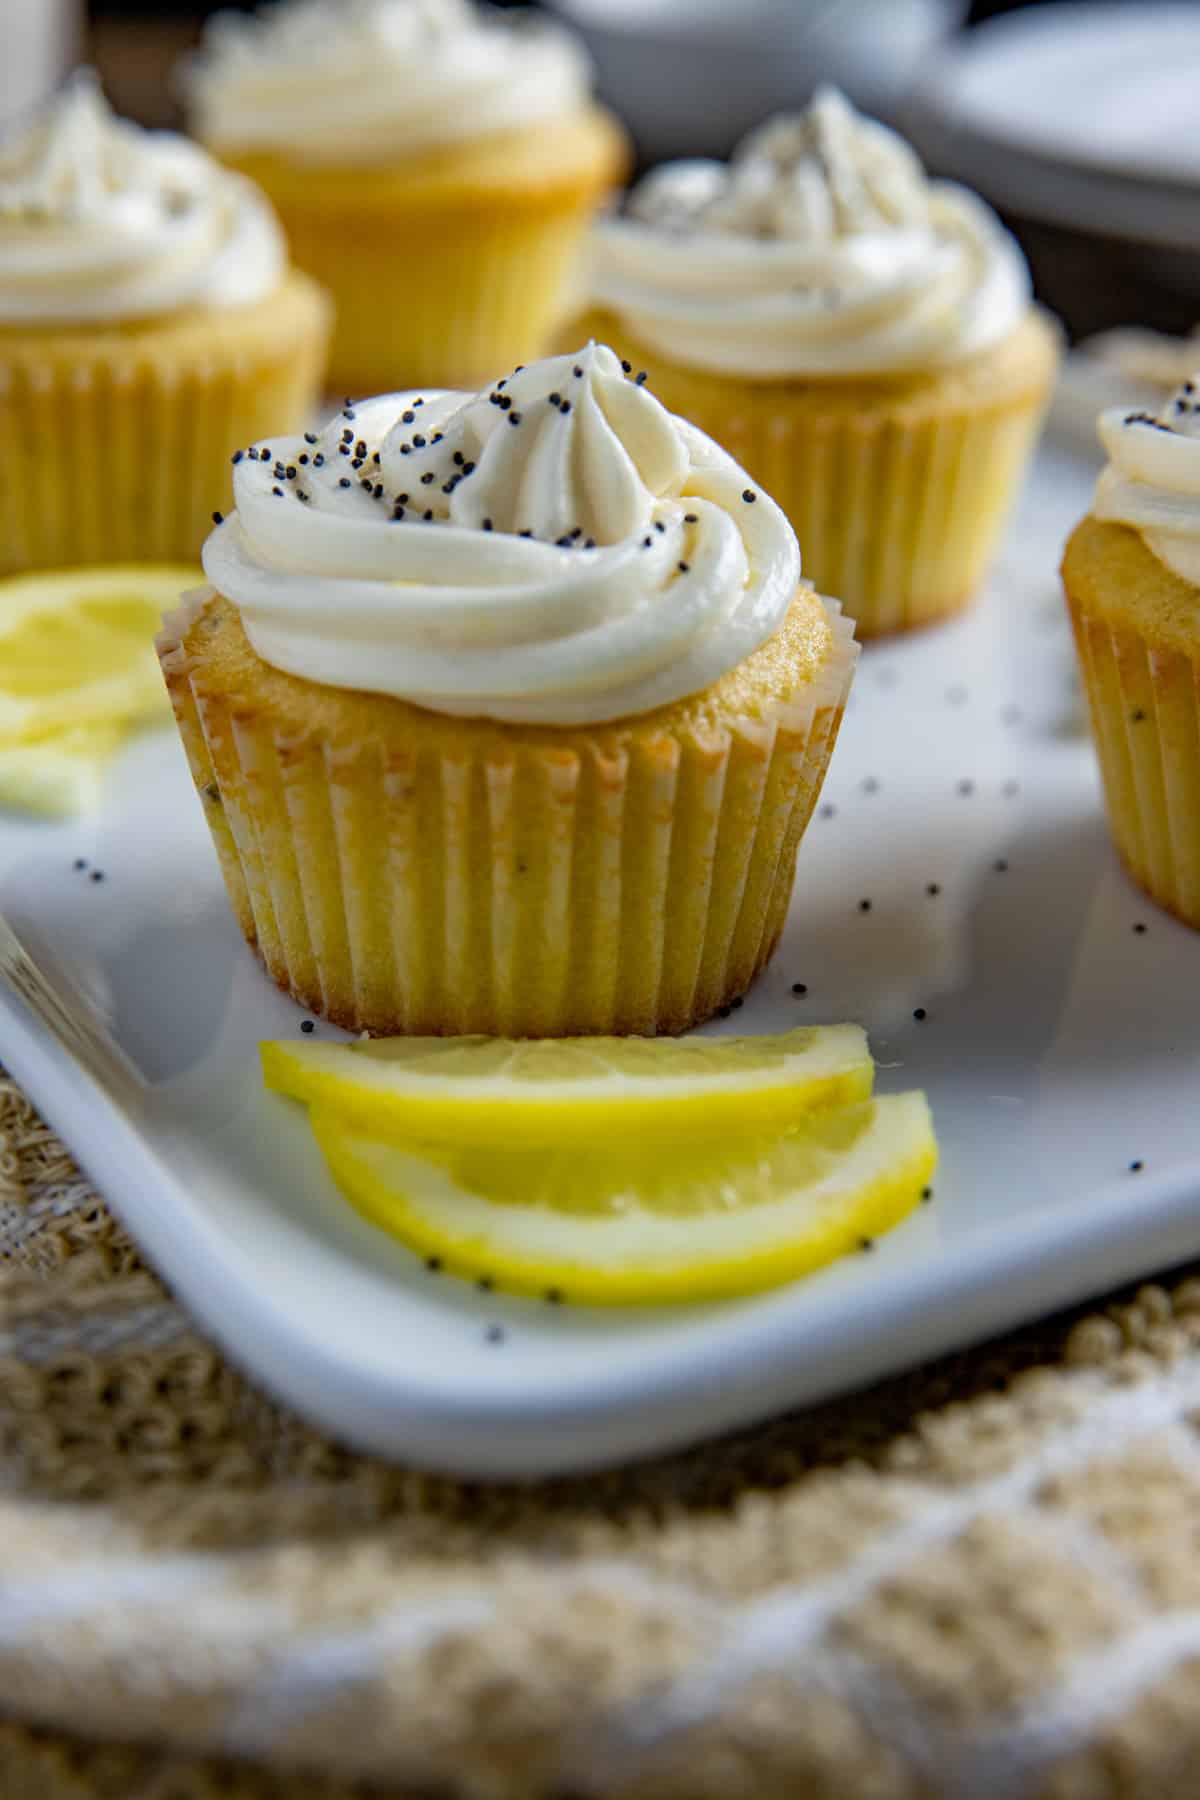 Frosted cupcakes on light blue serving platter with lemon slices as garnish.